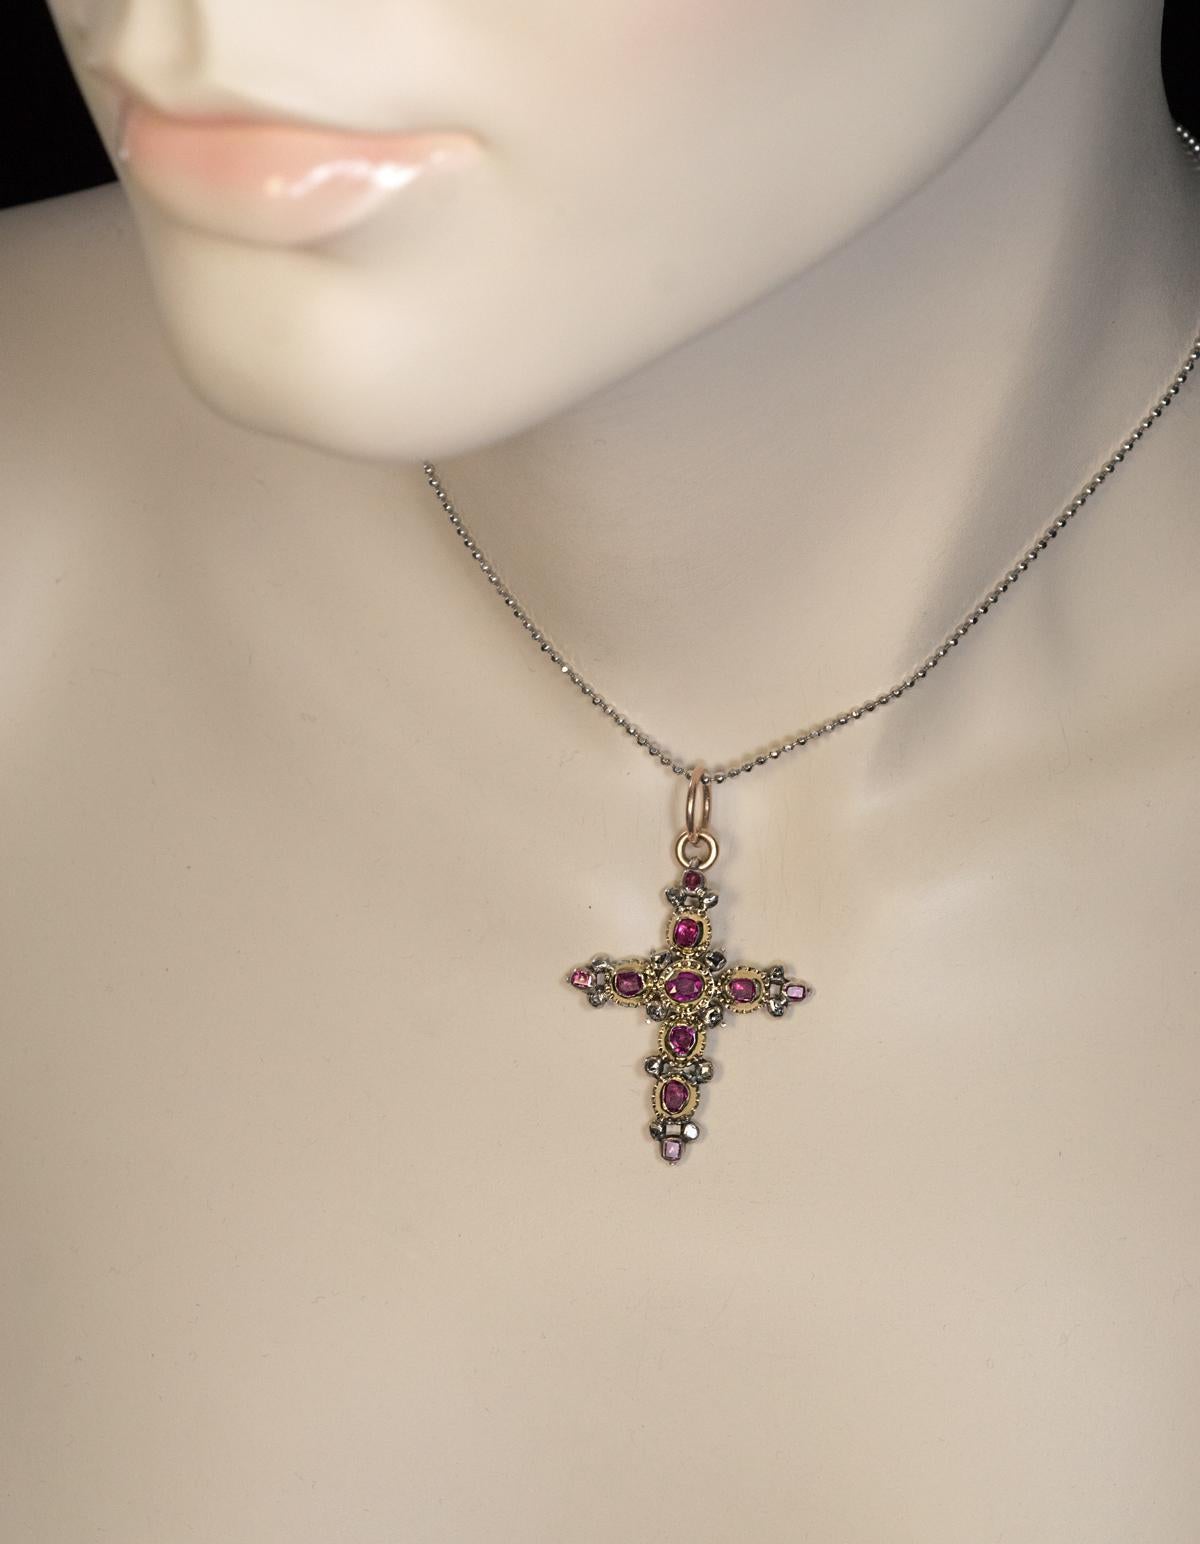 This rare 18th century gold (approximately 16.5K) and silver cross is embellished with rubies and rose cut diamonds set in rub-over settings. The center ruby is of an oval cut, other 9 rubies are of a table cut.

The rubies of the cross symbolize